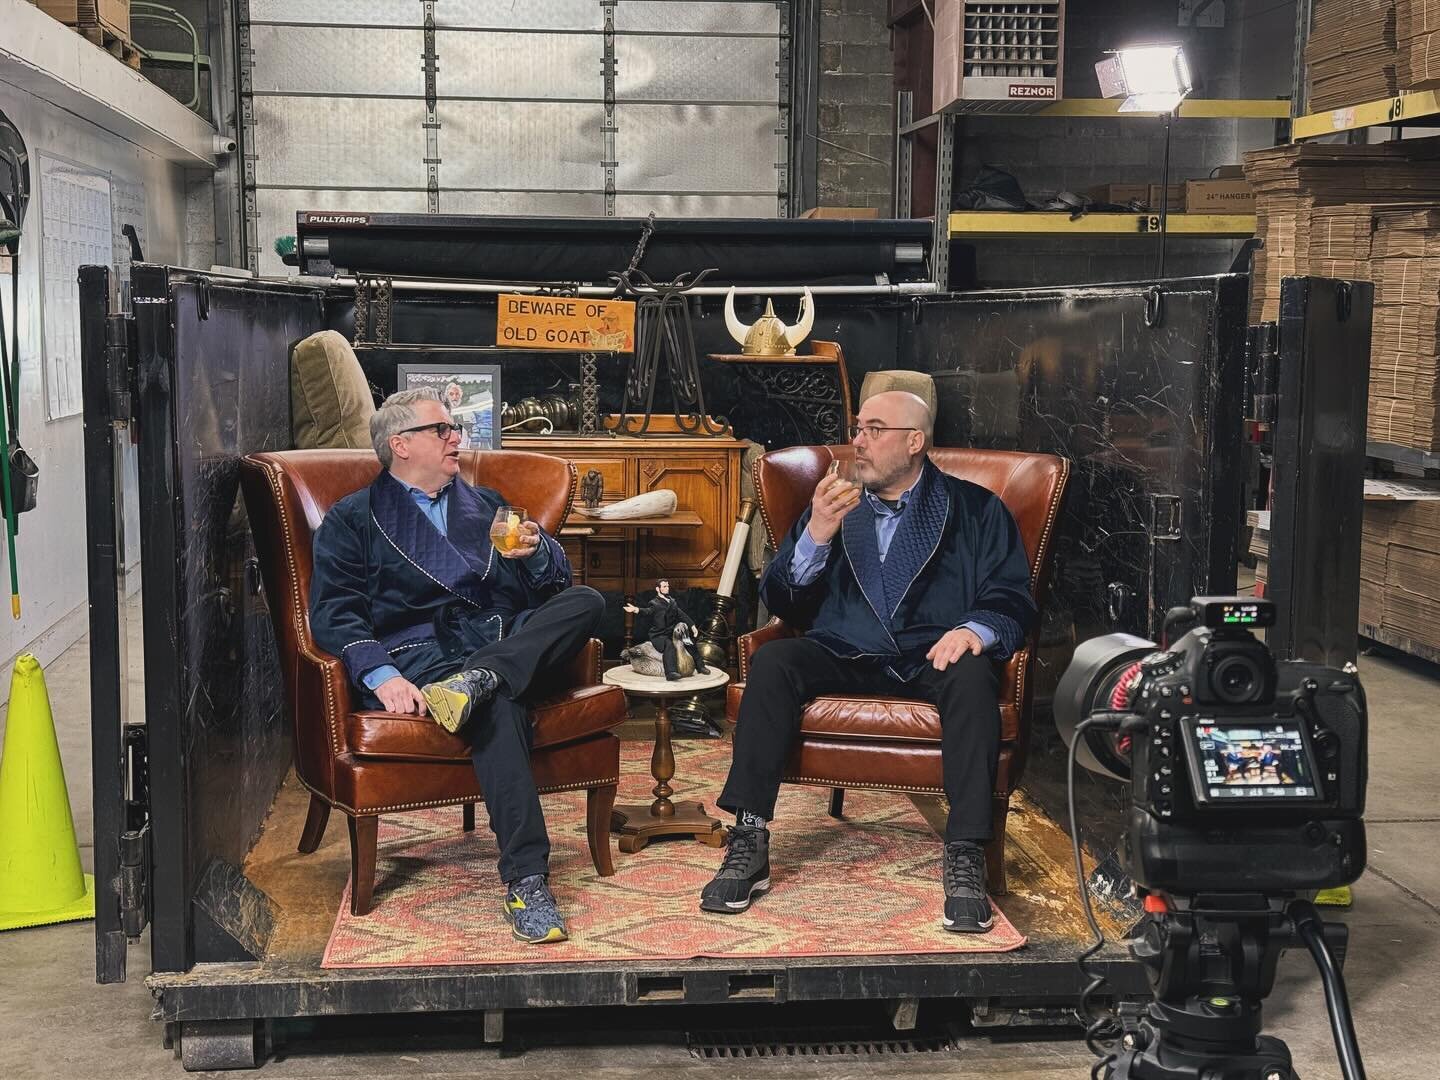 This is definitely the first time we&rsquo;ve had a production set in a dumpster. All for the Two Men And A Junk Truck Pittsburghs&rsquo; newest series, &ldquo;Sophisticated Junk.&rdquo; Watch the full episode on Two Men and a Junk Truck - Pittsburgh